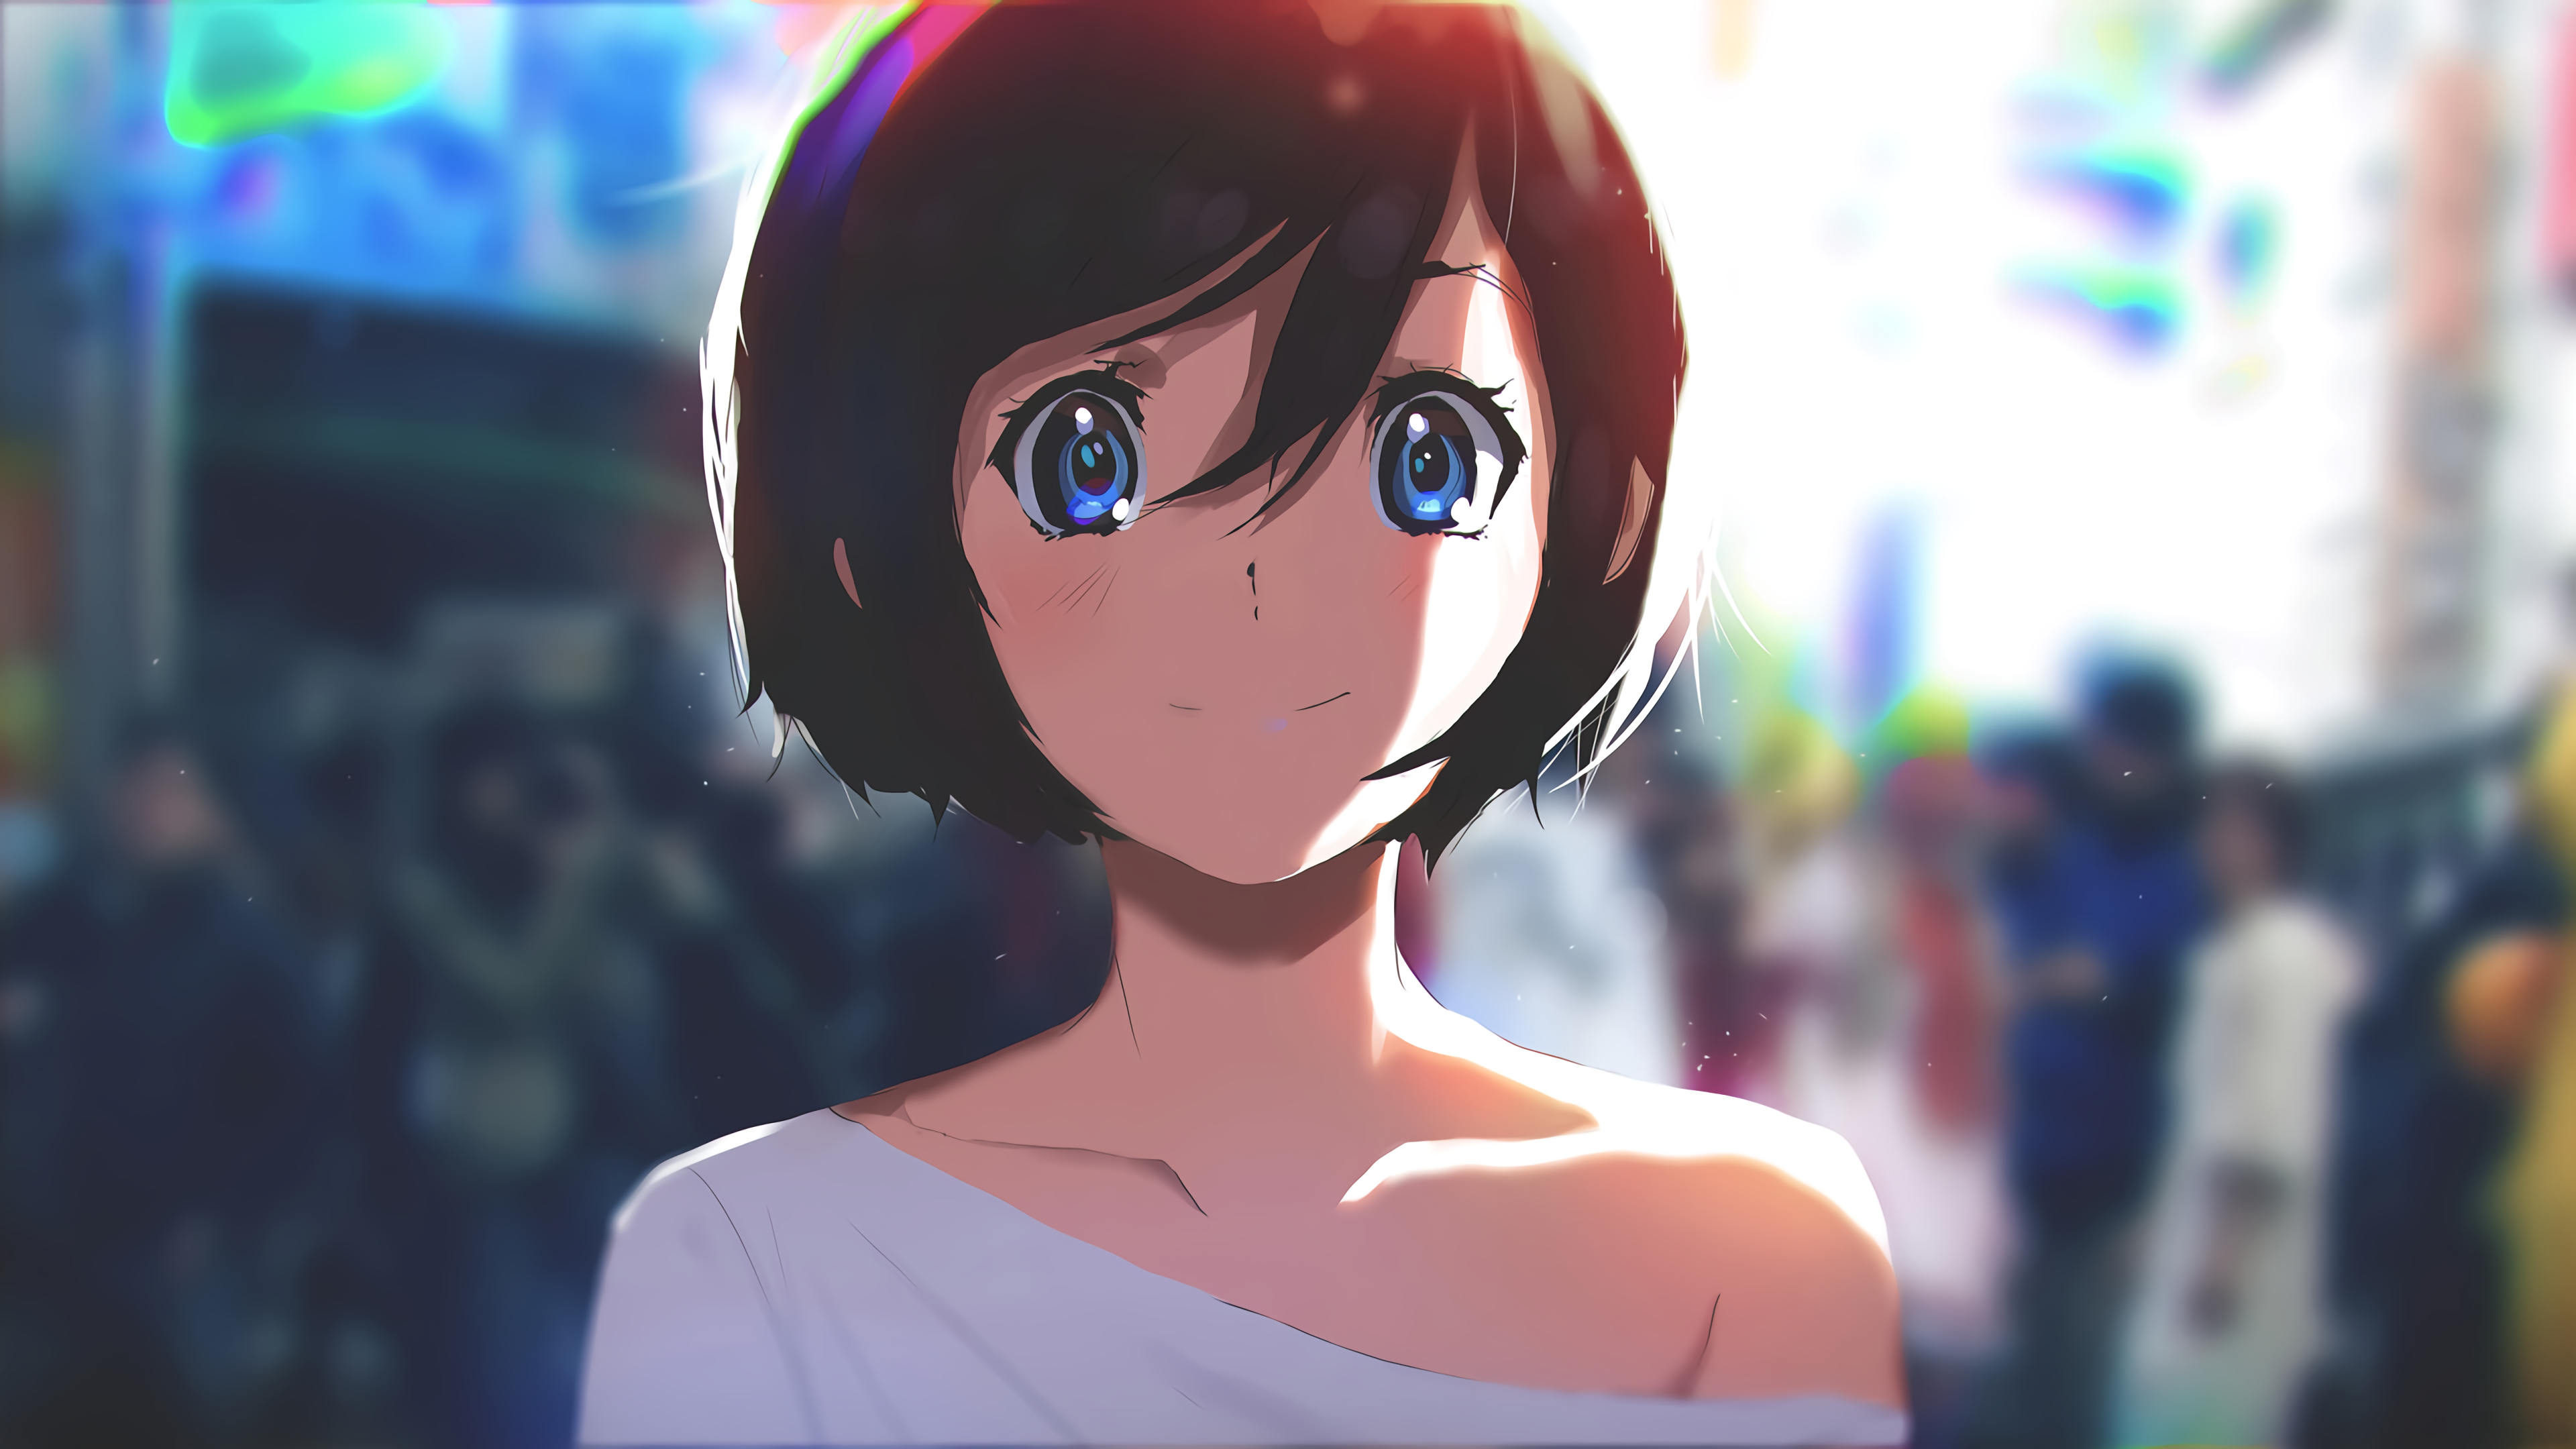 Tom Skender Anime Girls Anime DeviantArt Looking At Viewer Smiling Closed Mouth Short Hair Blurred B 3840x2160